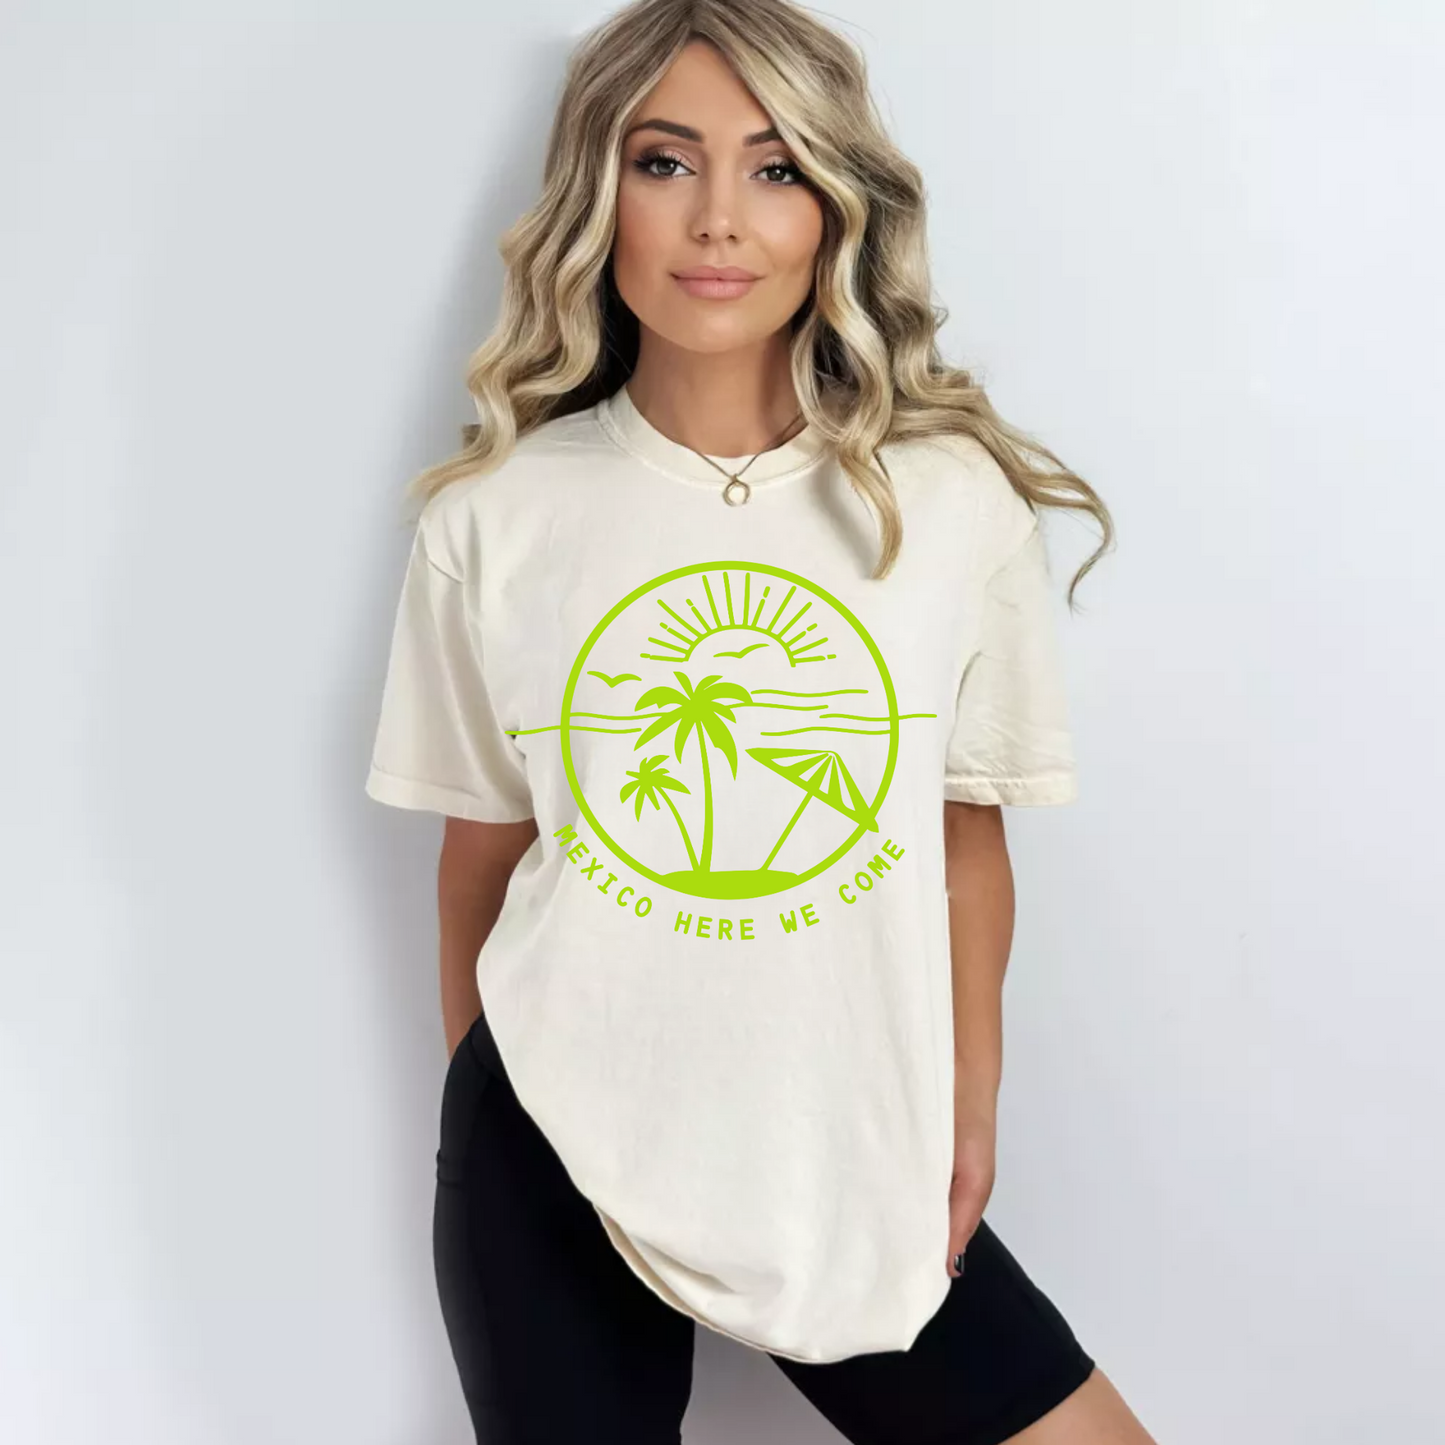 (Shirt not included) Mexico here we come - Bright Green Screen print Transfer